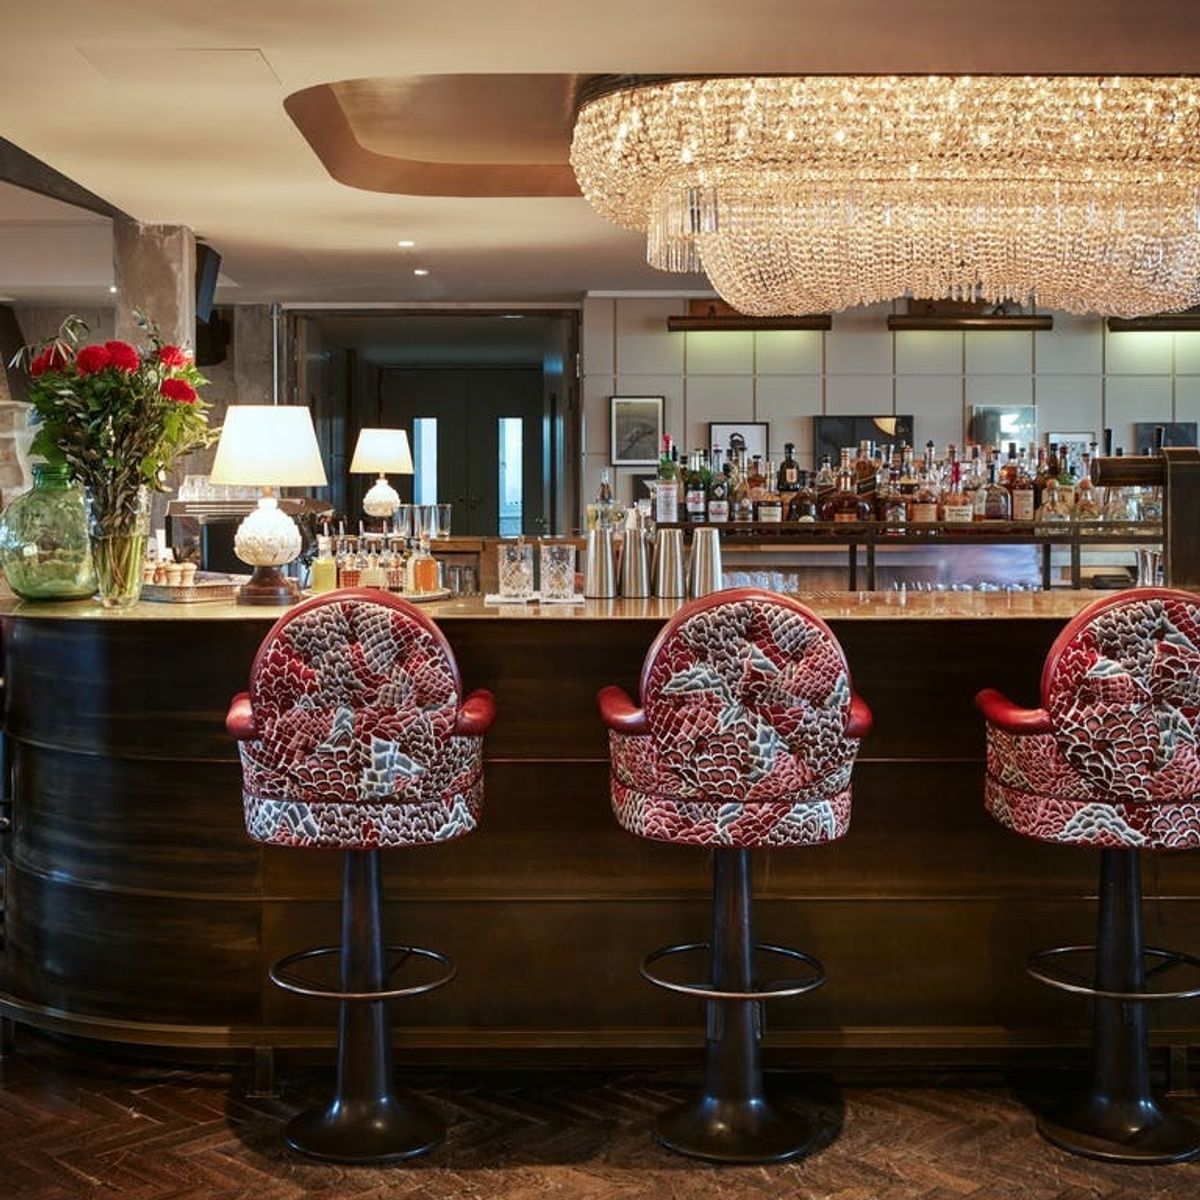 12 Fashionable Hotels Bars Made for Girls’ Night Out